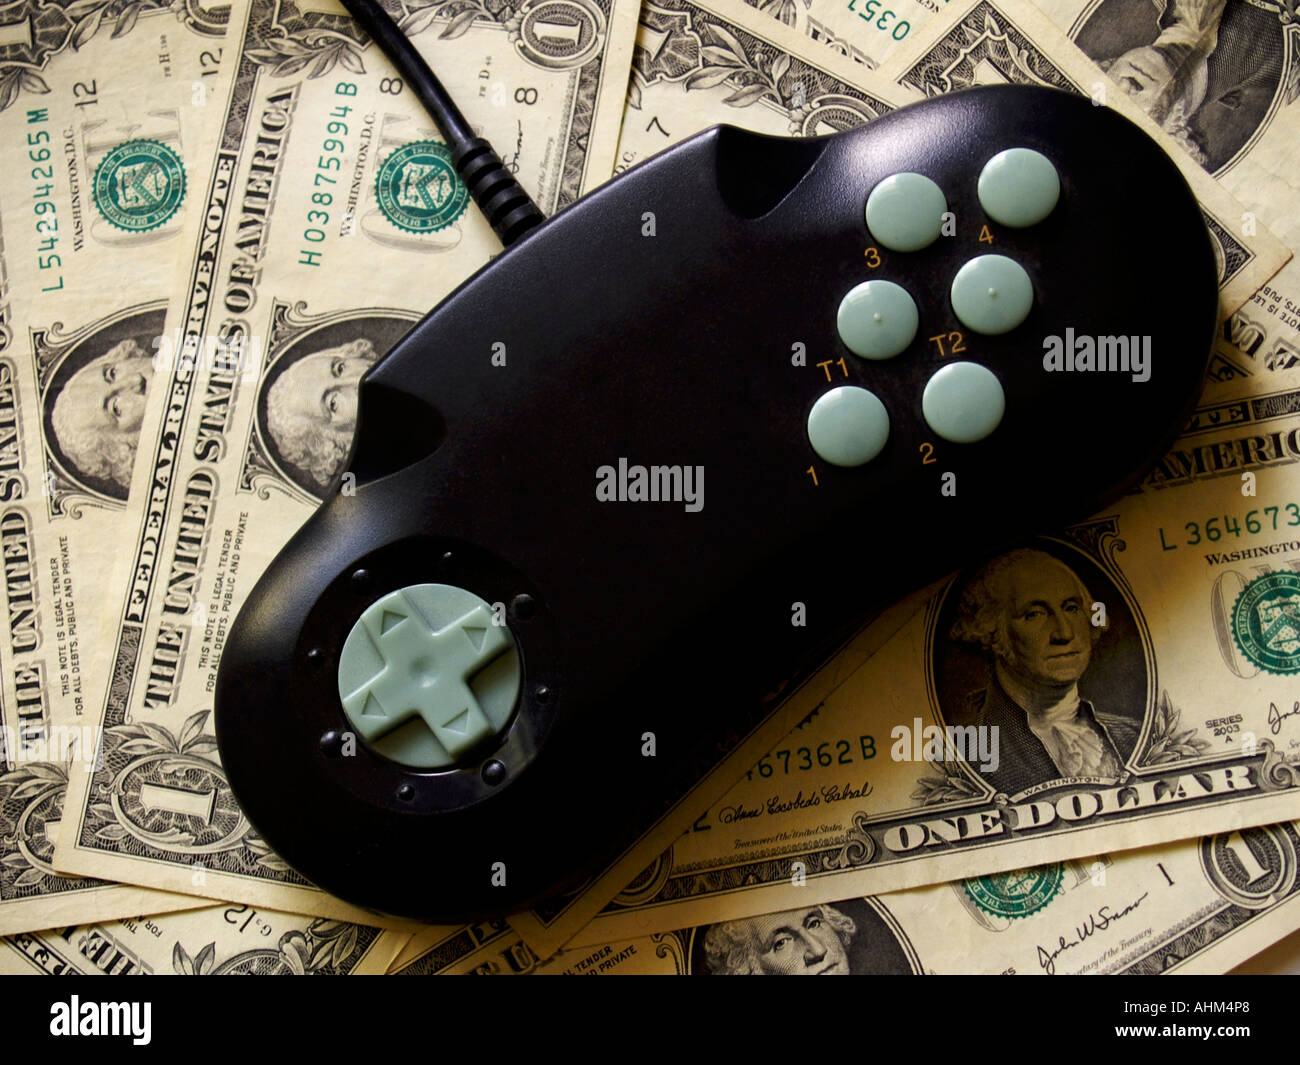 Black and cyan video game console controller against a background of dollar bills Stock Photo